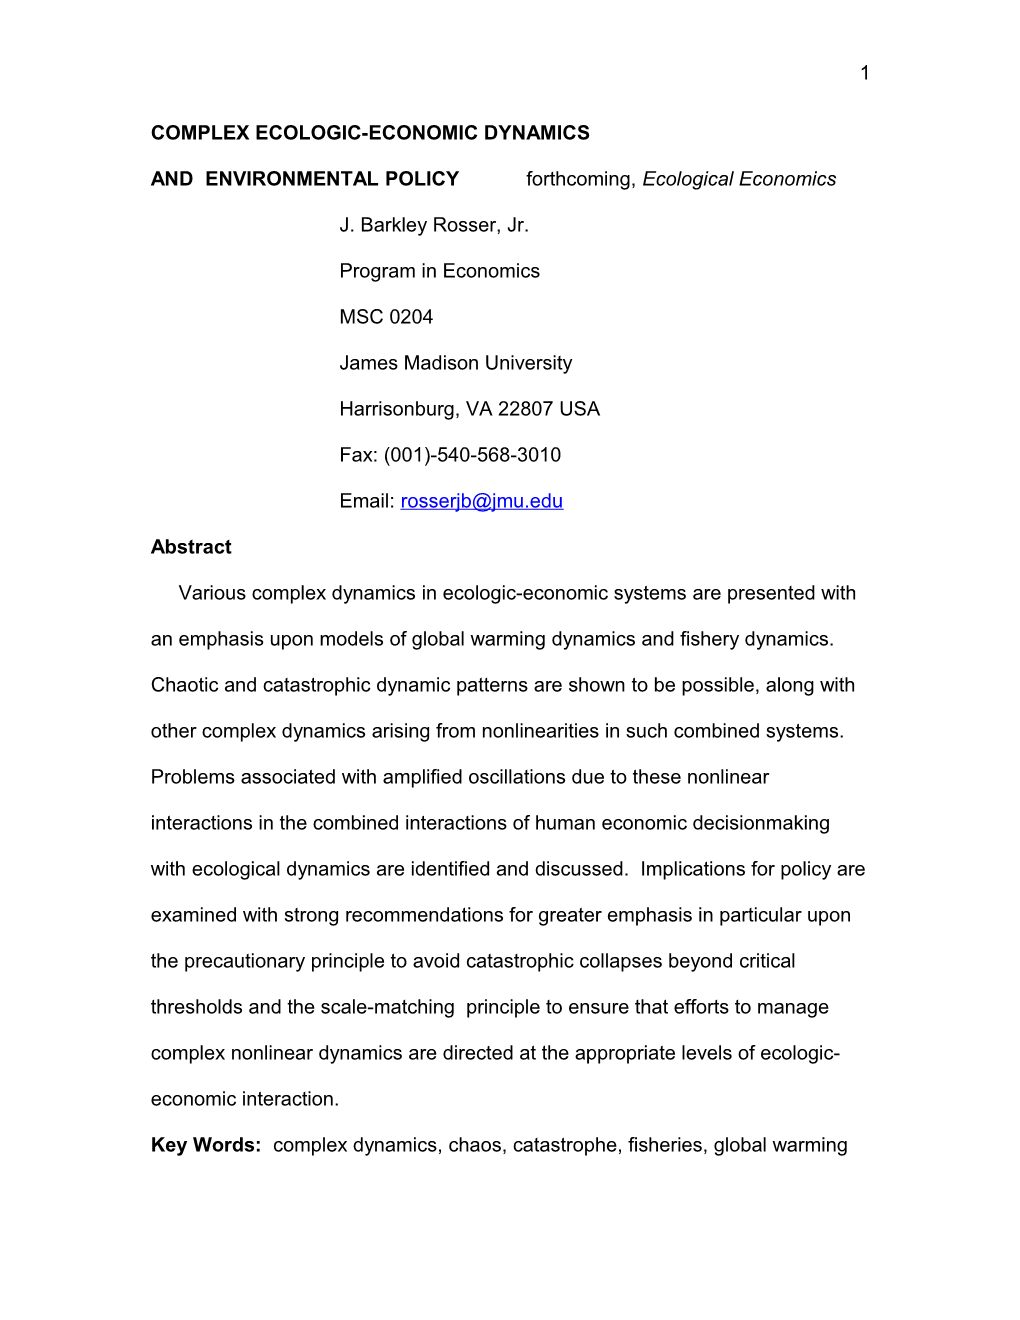 The Problem of Global Environmental Policy in A